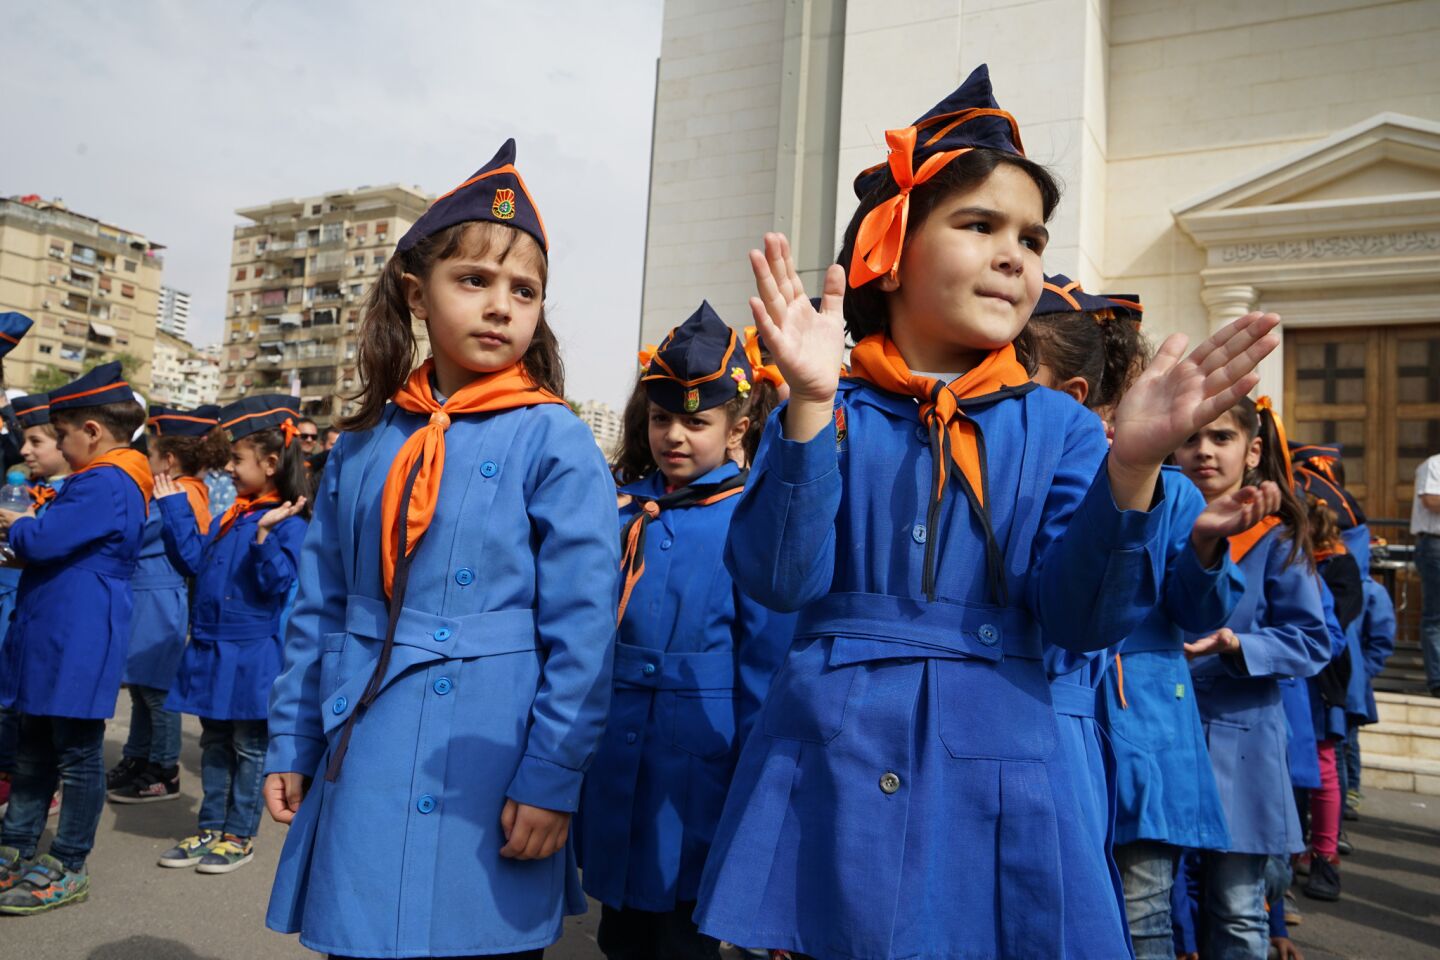 Pro-government pioneers in Damascus' Dumar neighborhood. The elementary school children are part of a ruling party youth group.